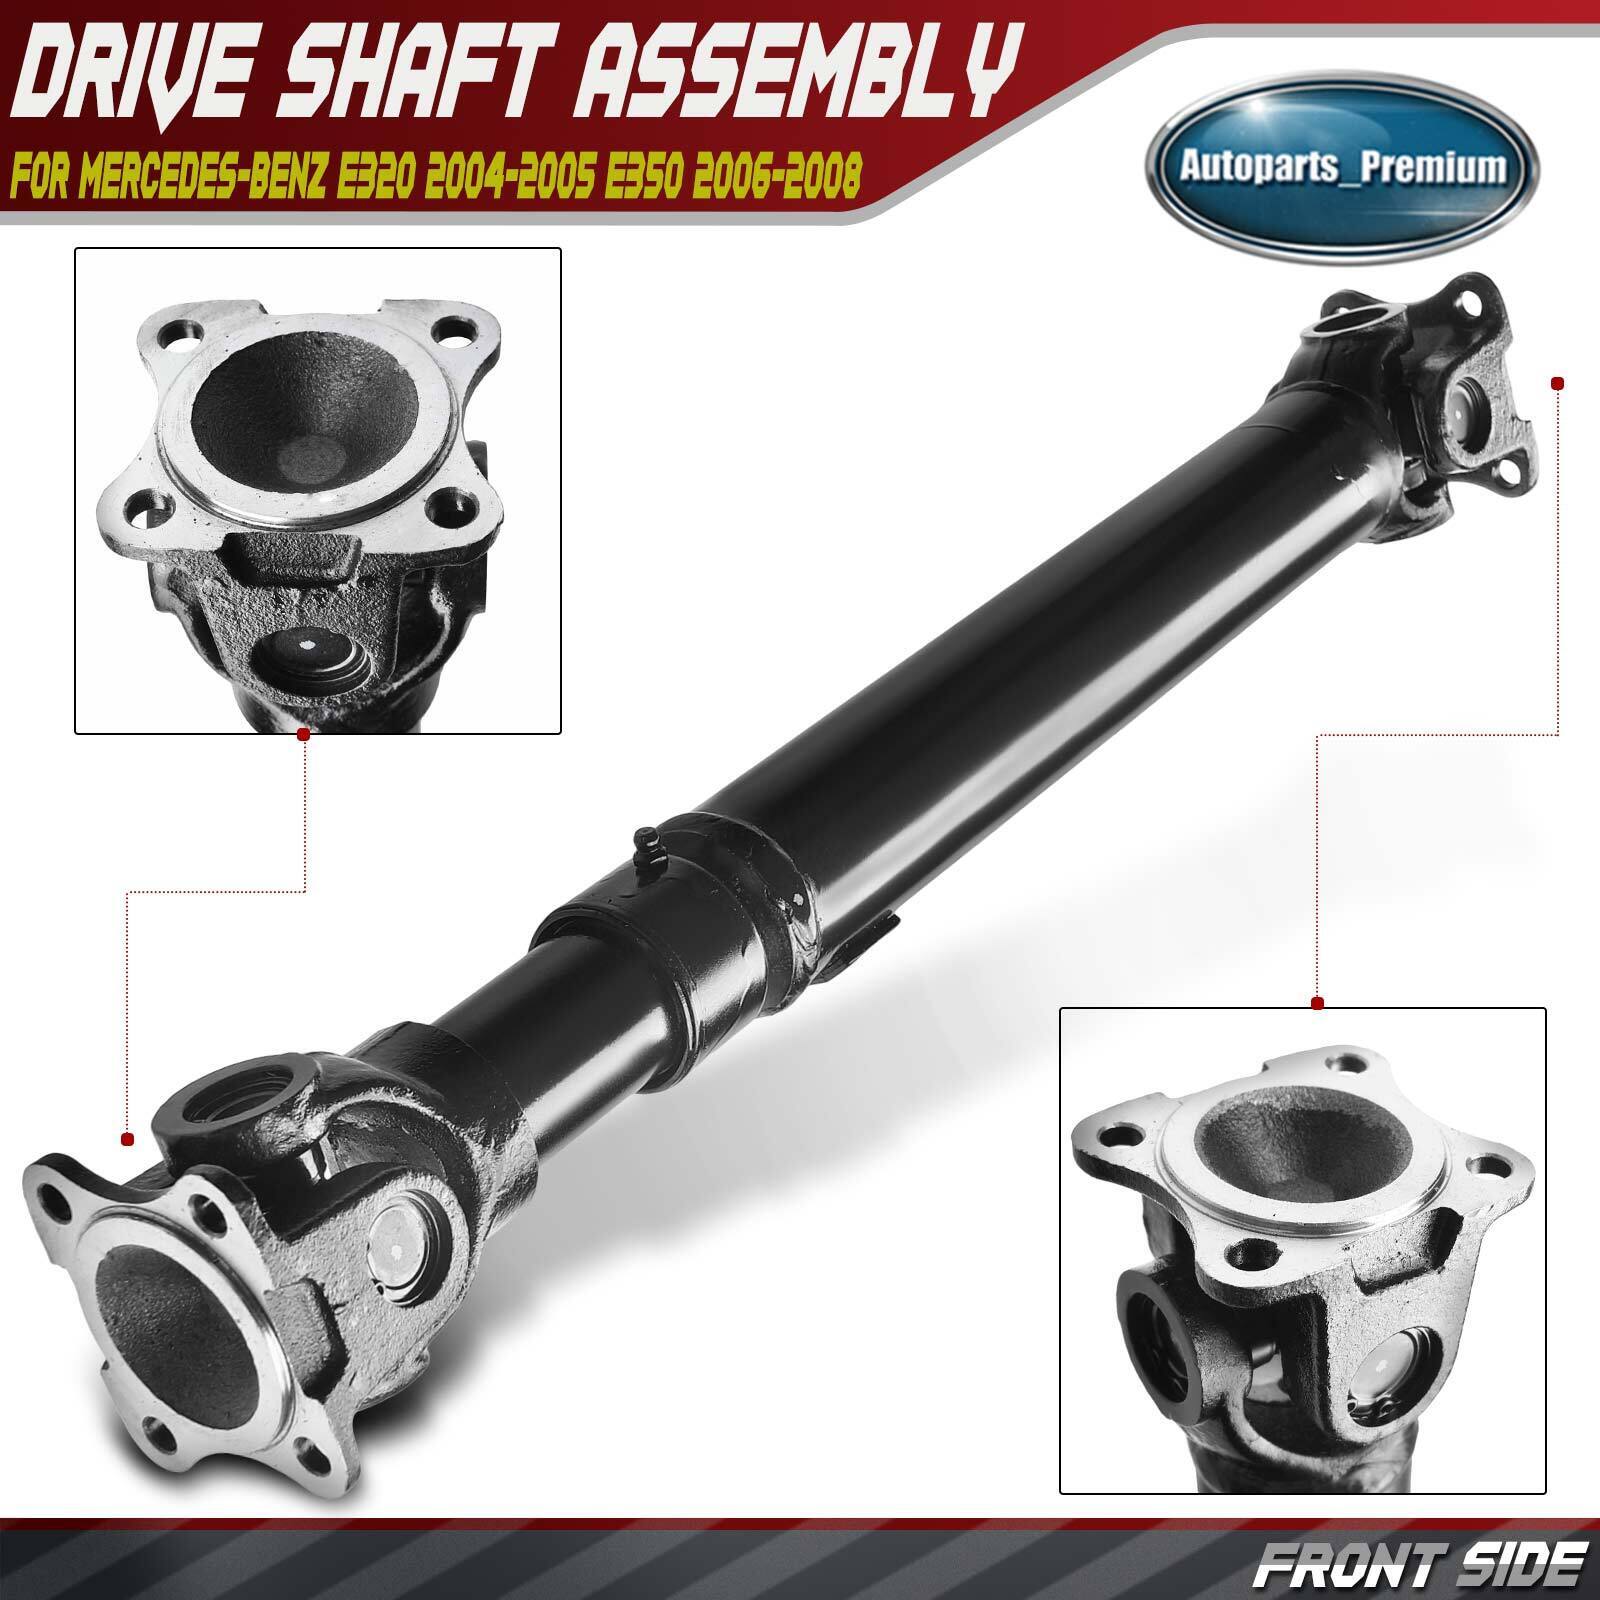 New Front Drive Shaft Assembly for Mercedes-Benz W211 E280 E320 E350 4Matic AWD